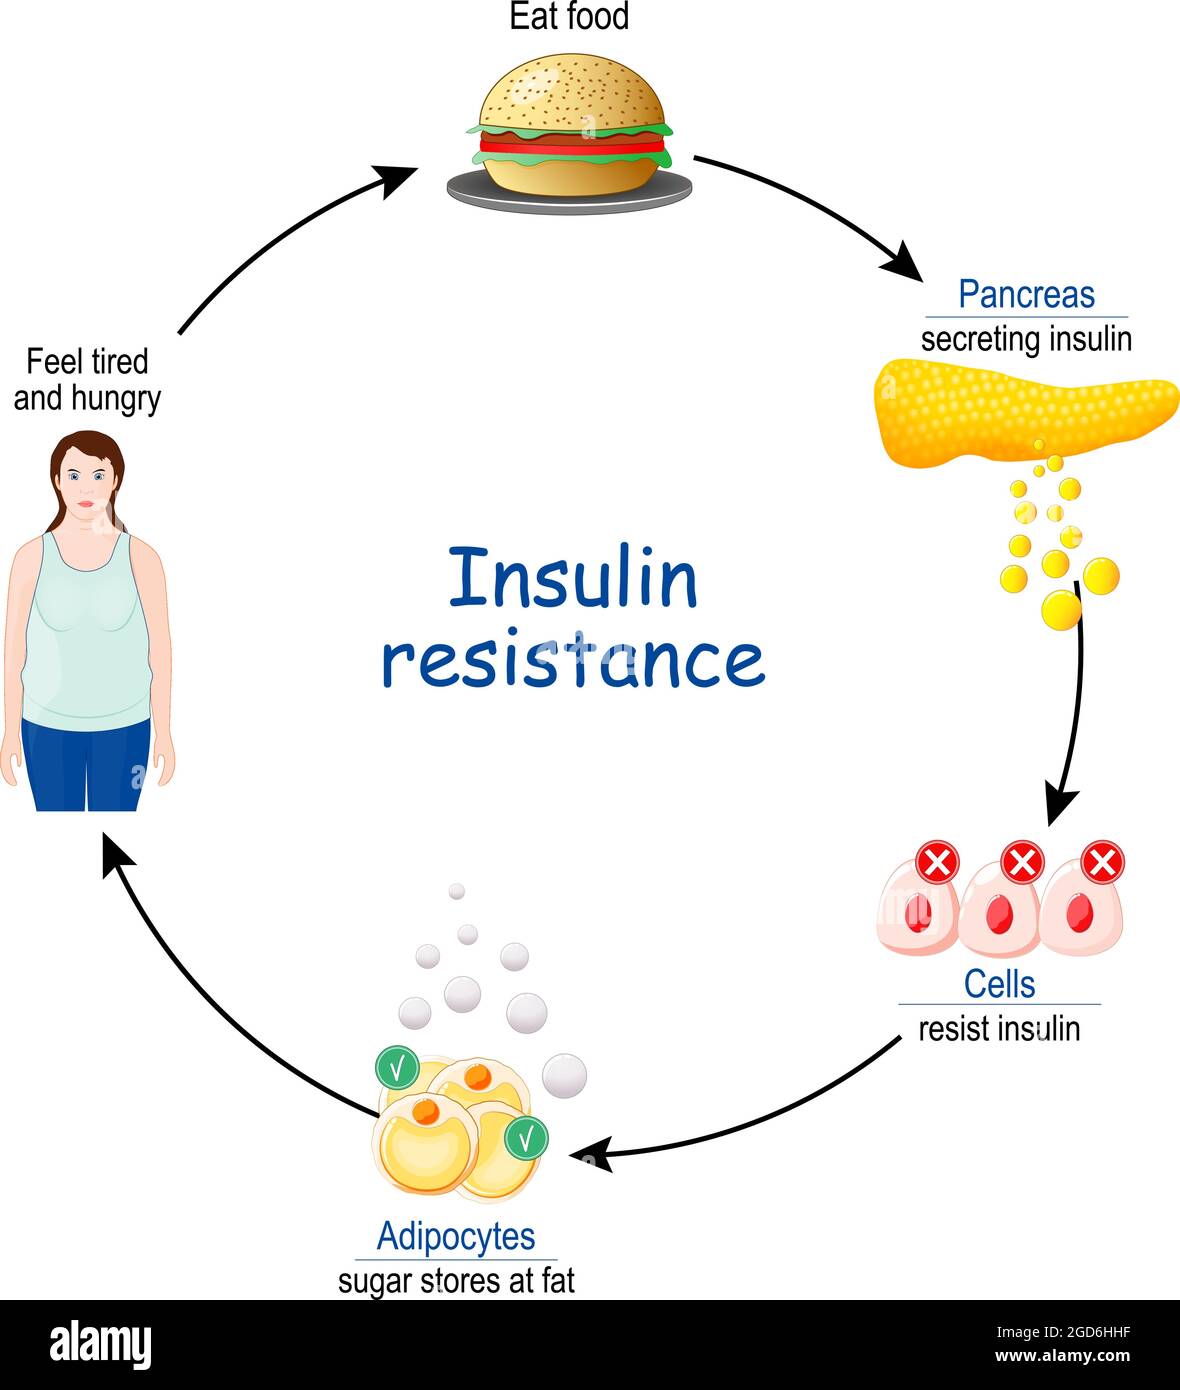 Insulin Resistance. cycle of insulin and glucose, before and after eat food. vector illustration. Stock Vector